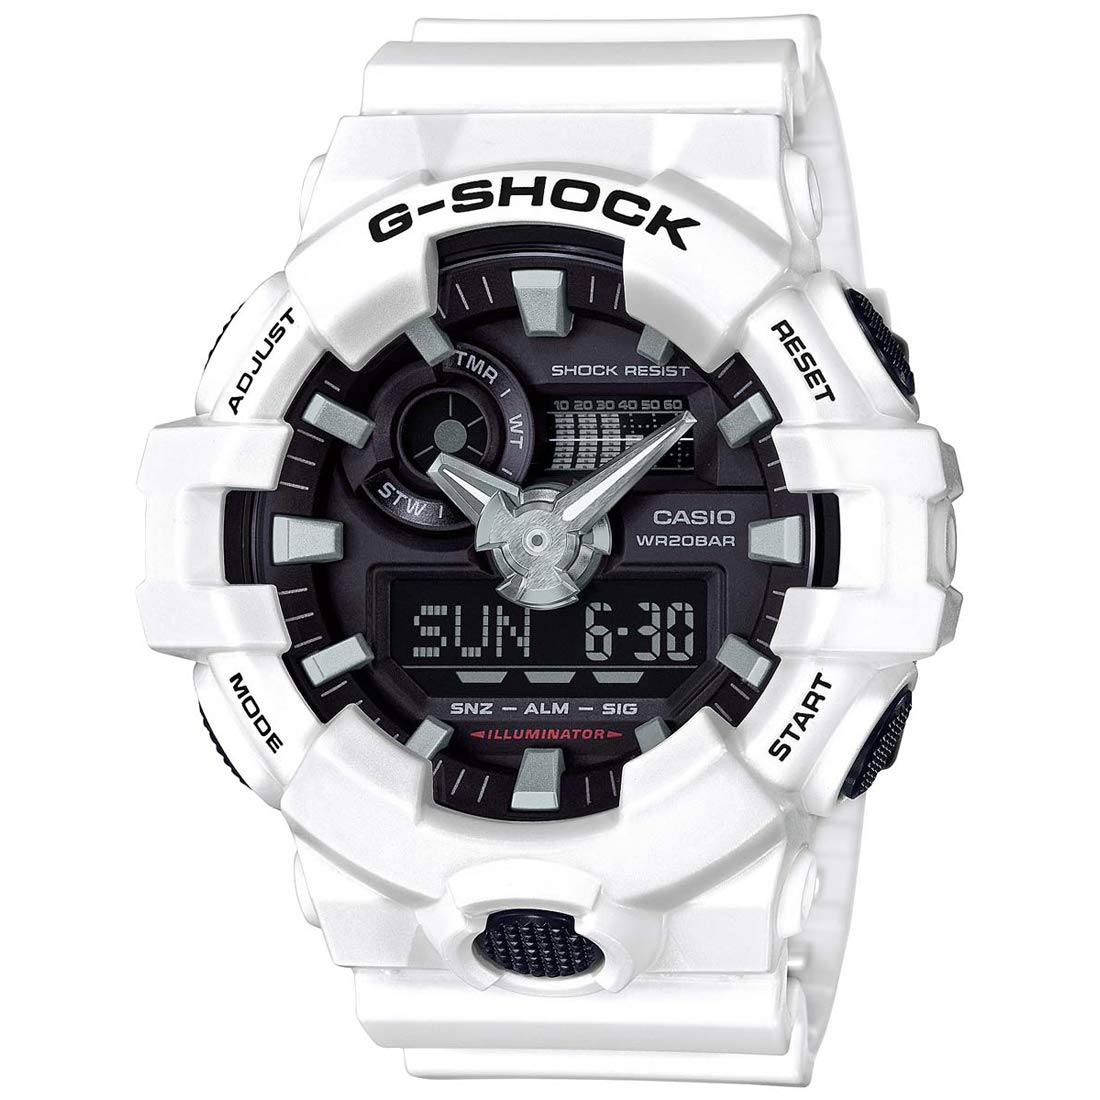 Casio G-Shock Analog Digital White Belt Men's Watch For Man GA-700-7APR Multi Color Dial Day And Date Gift Watch